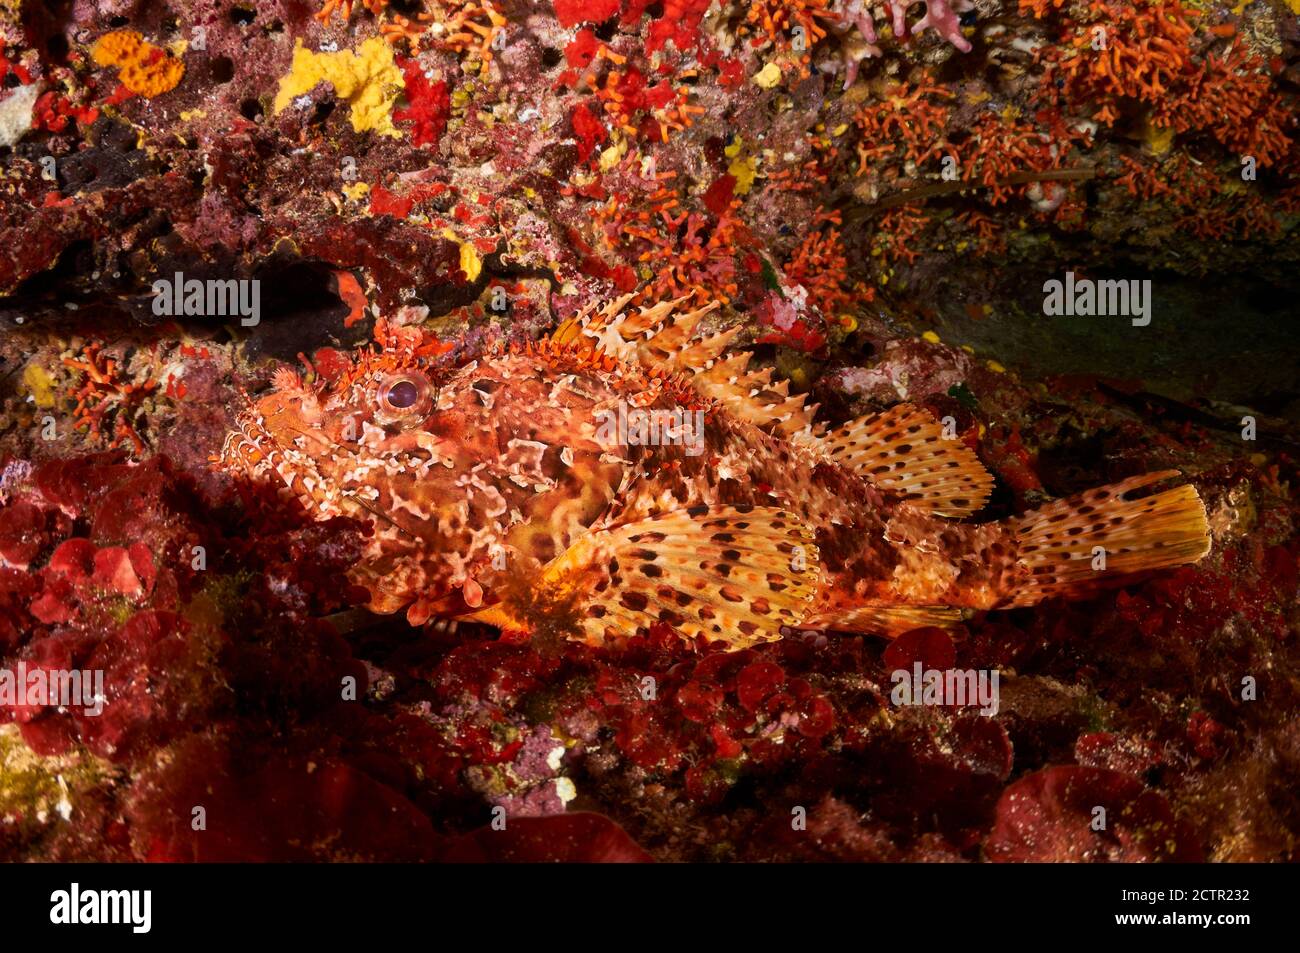 A red scorpionfish (Scorpaena scrofa) camouflaged in an underwater cave in Ses Salines Natural Park (Formentera, Balearic Islands, Mediterranean sea) Stock Photo